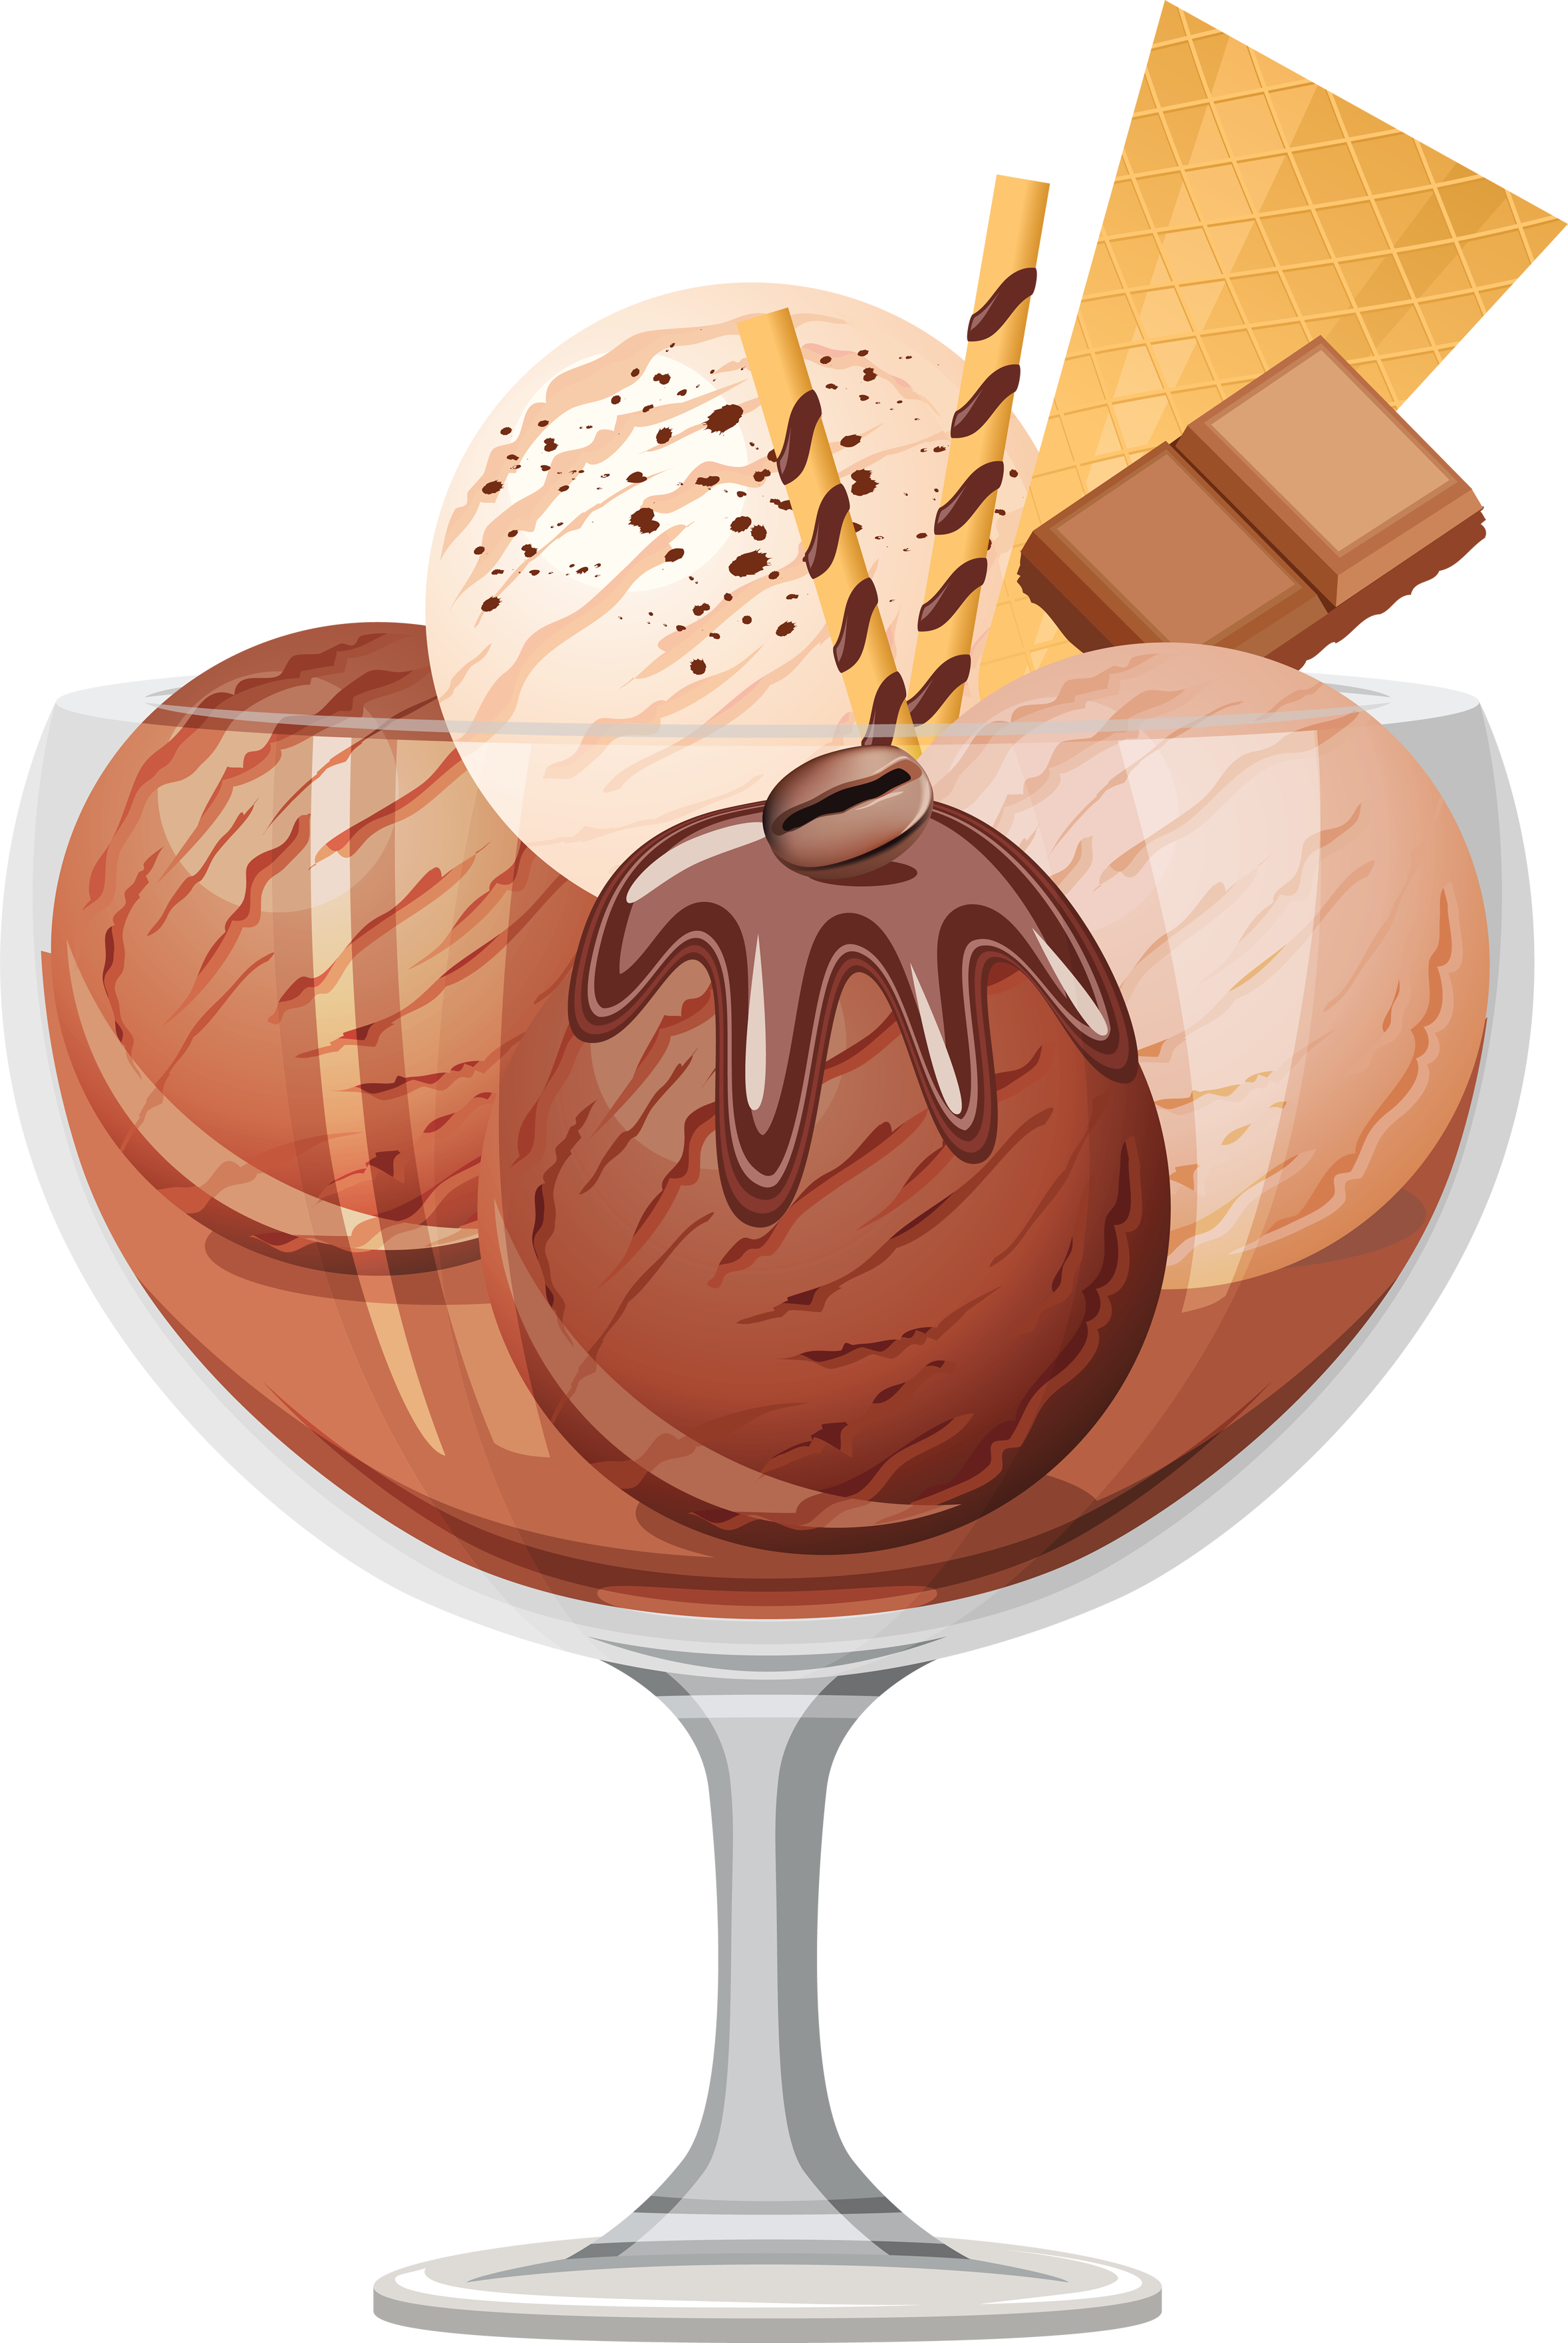 Ice clipart file. Chocolate cream png image